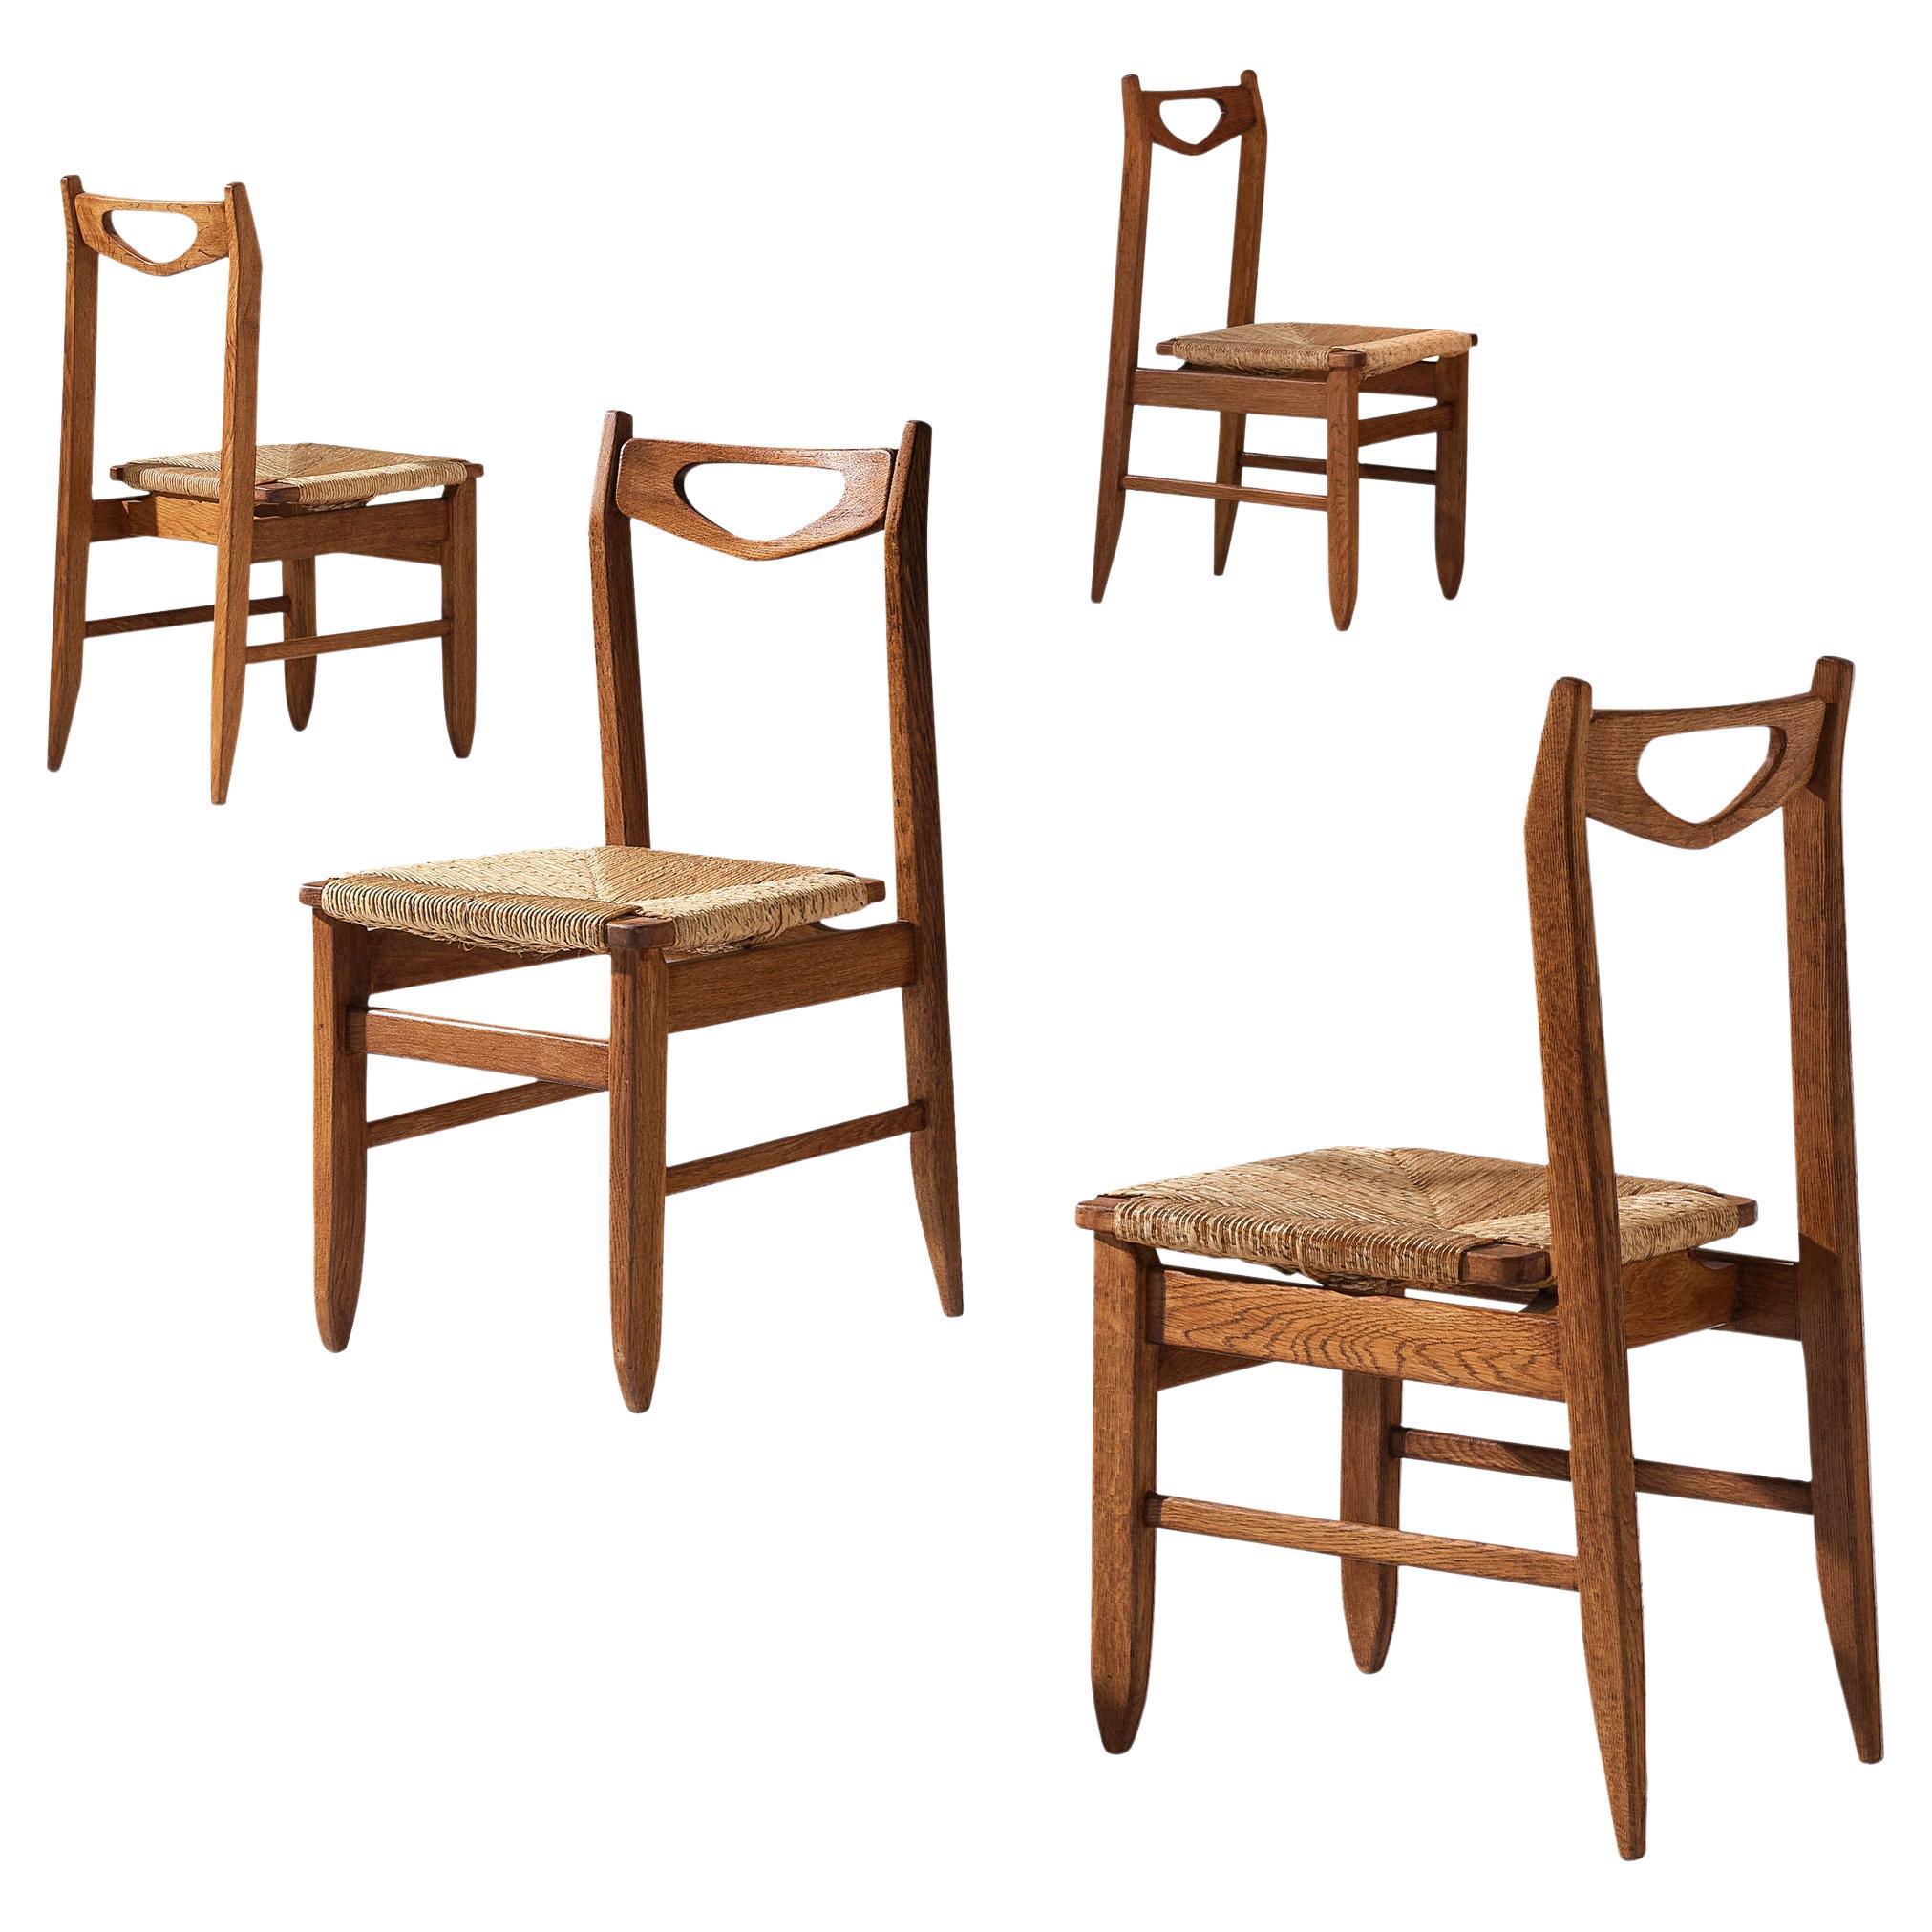 Guillerme & Chambron Set of Four Dining Chairs in Oak with Straw Seats